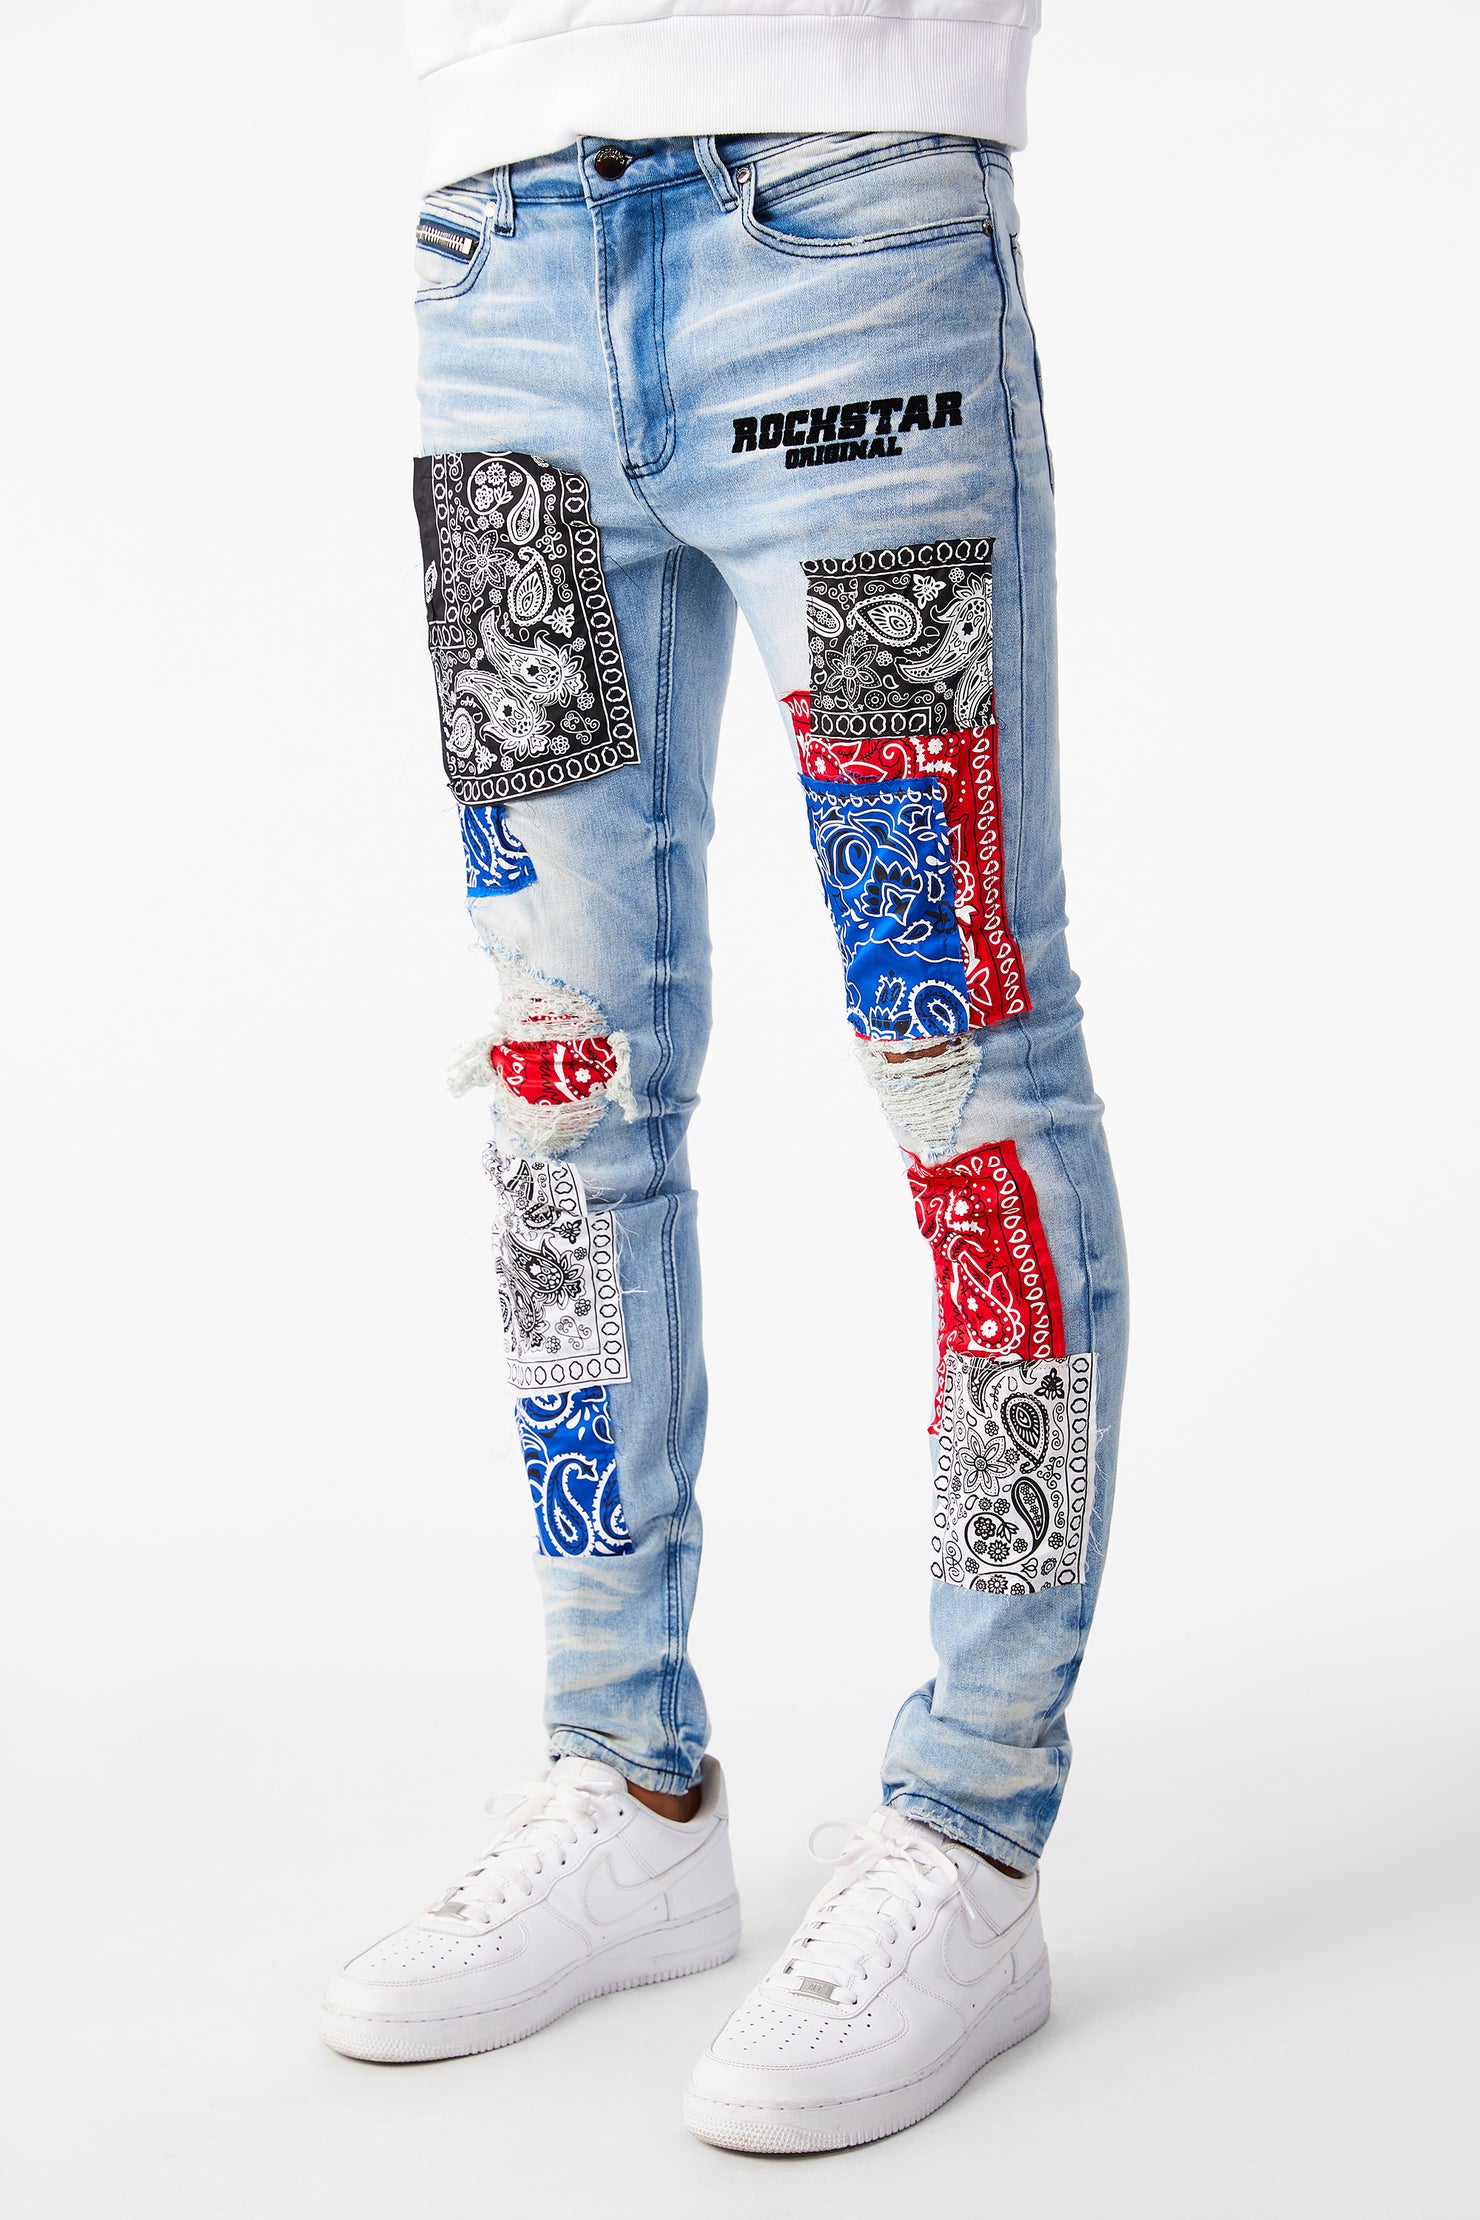 ROCKSTAR Men's Laizer Hand Painted Quilted Denim Jeans ROCKSTAR Men's  Laizer Hand Painted Quilted Denim Jeans ROCKSTAR Men's Laizer Hand Painted  Quilted Denim…